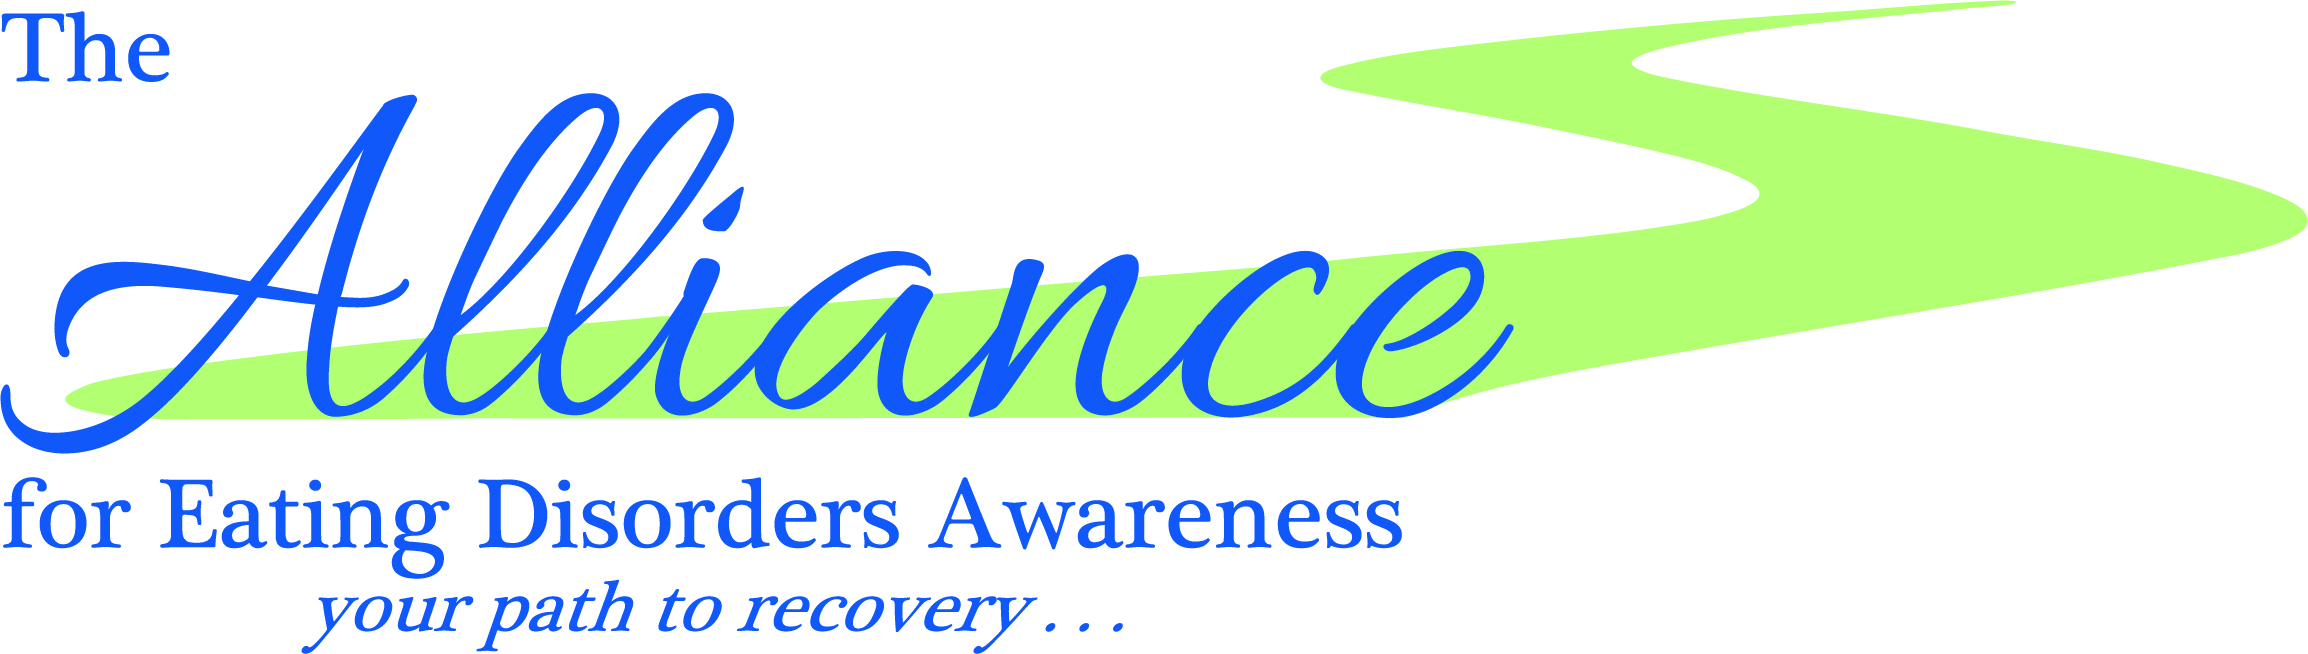 The Alliance for Eating Disorders Awareness 